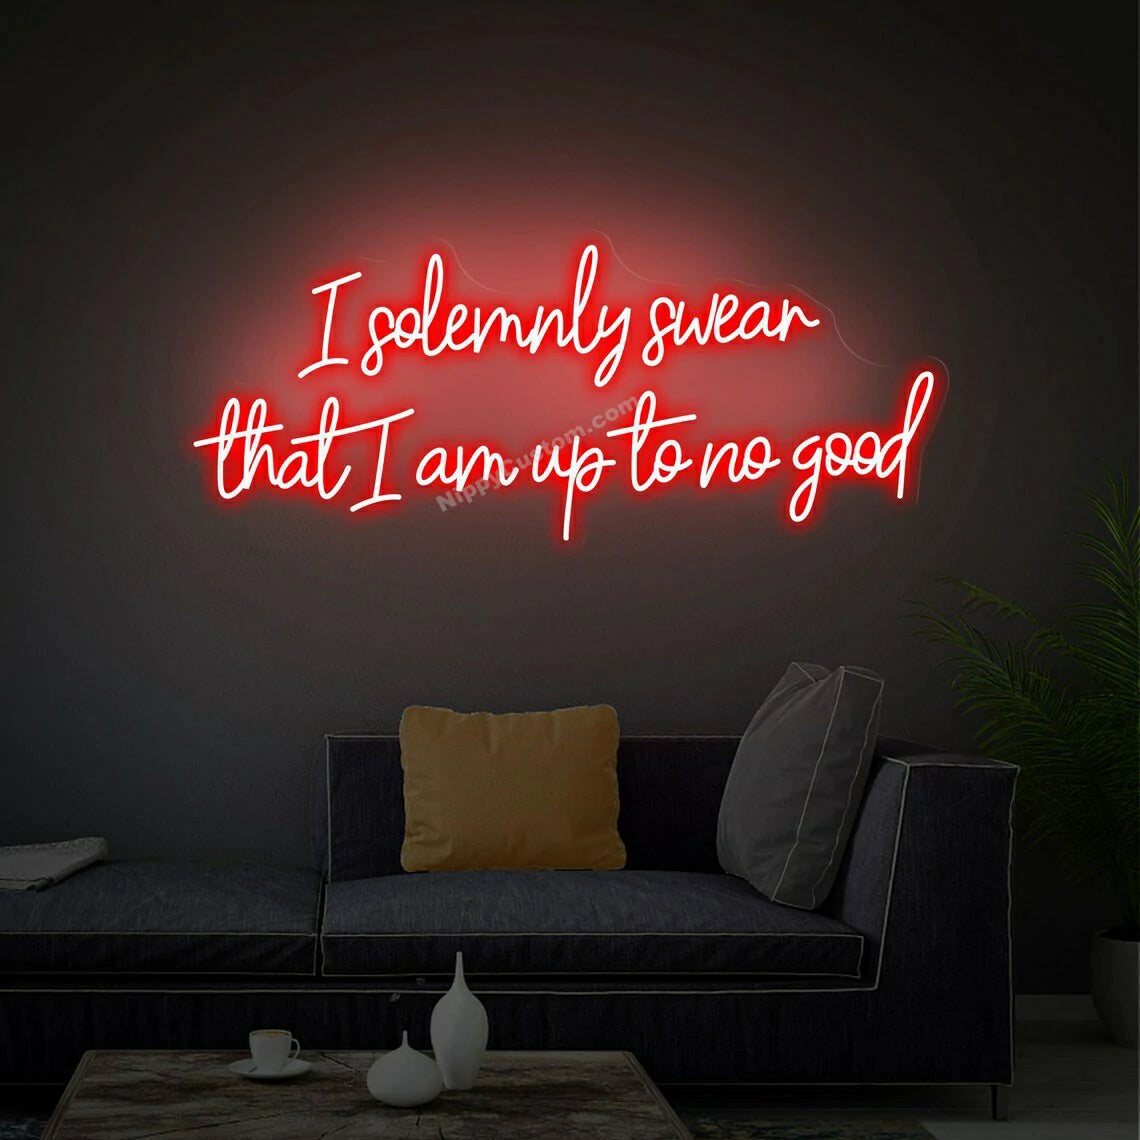 I Solemnly Swear That I Am up To No Good custom neon sign, Room Yard Home Wall Decor Art, Neon Sign Bedroom